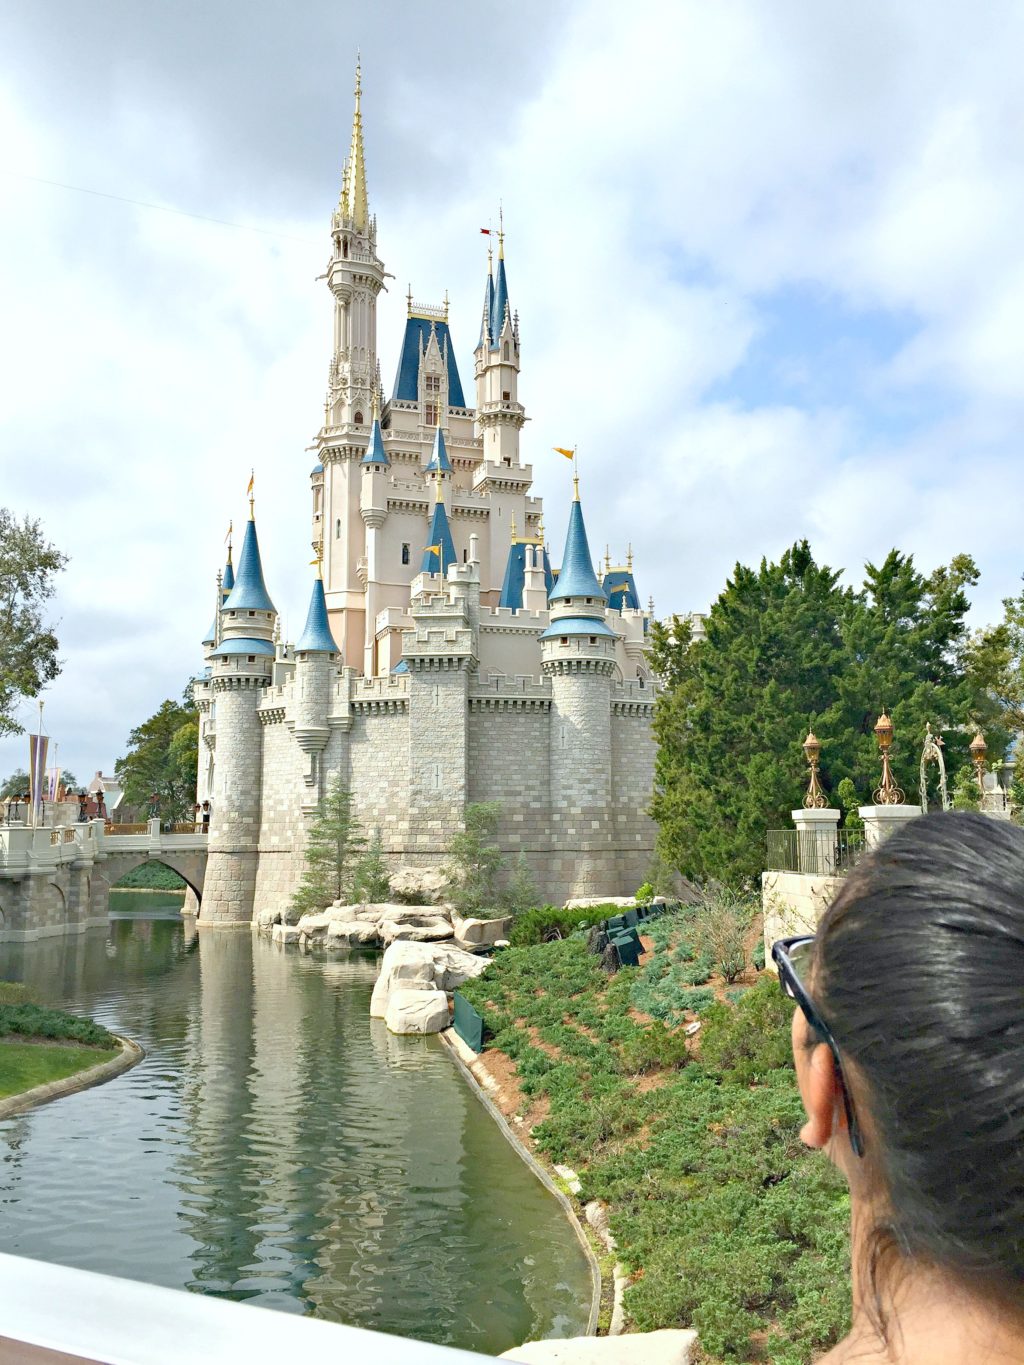 Gabby looks at the Cinderella castle at Disney World. This article covers family luggage maximizing tips.